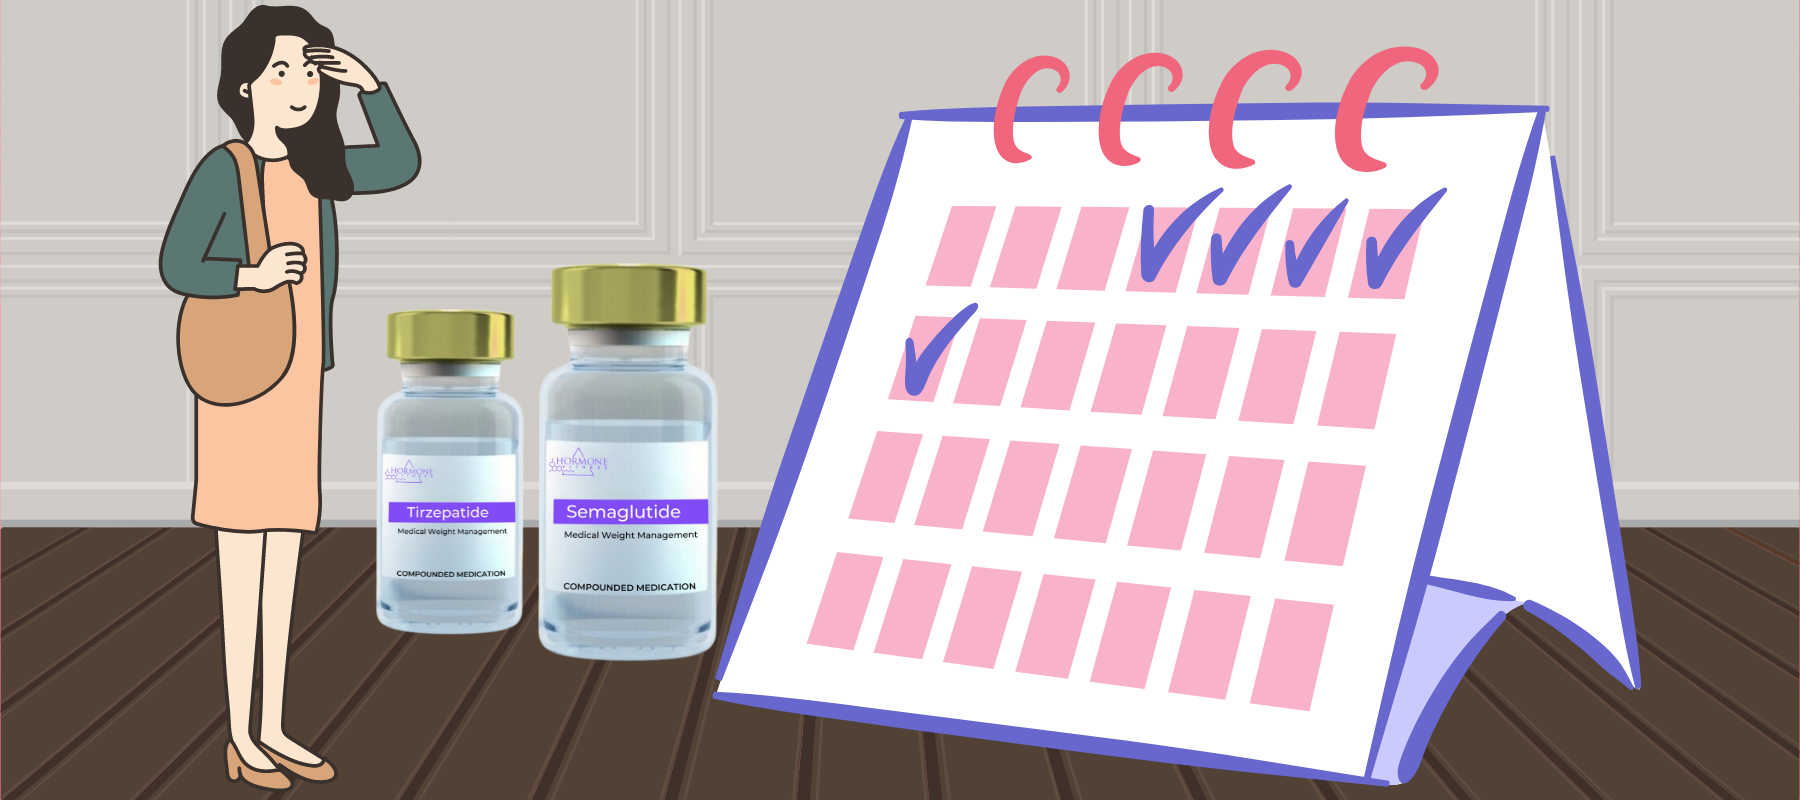 A woman is standing next to two vials of GLP-1 medications and a calendar.